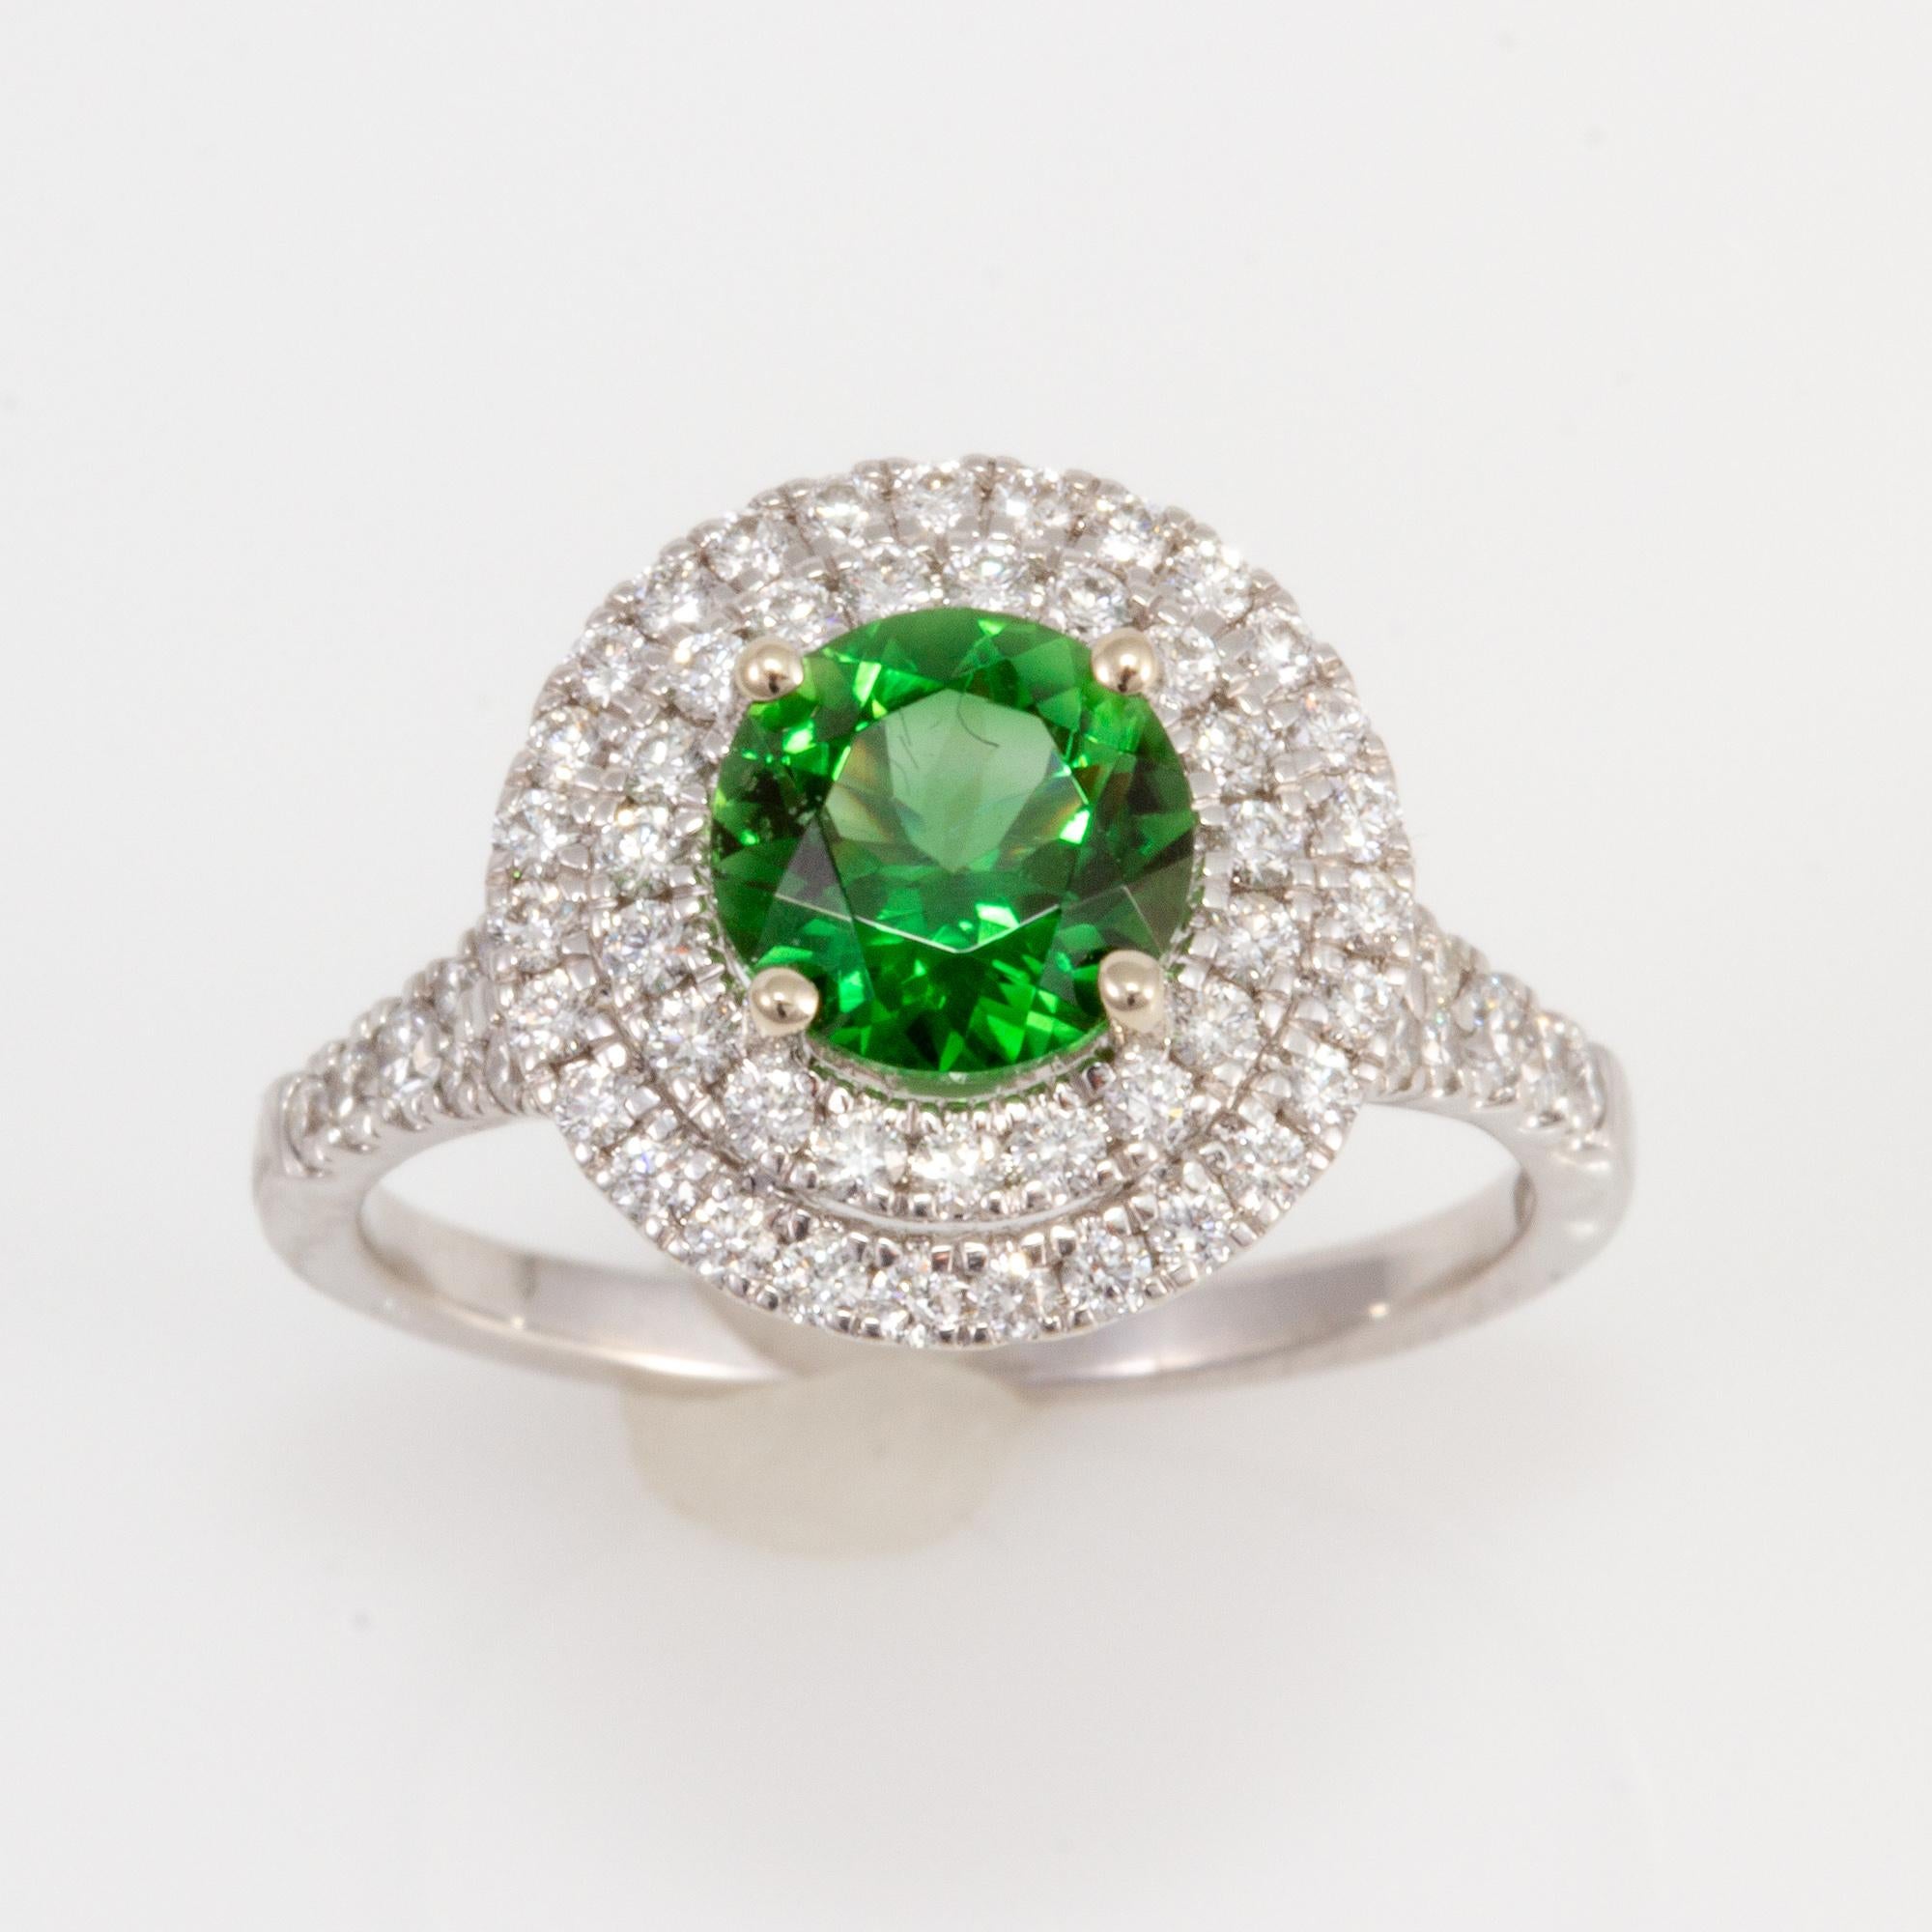 Classical Greek Exceptionally Well Cut 1.26 Carat Chrome Tourmaline and Diamond Ring For Sale